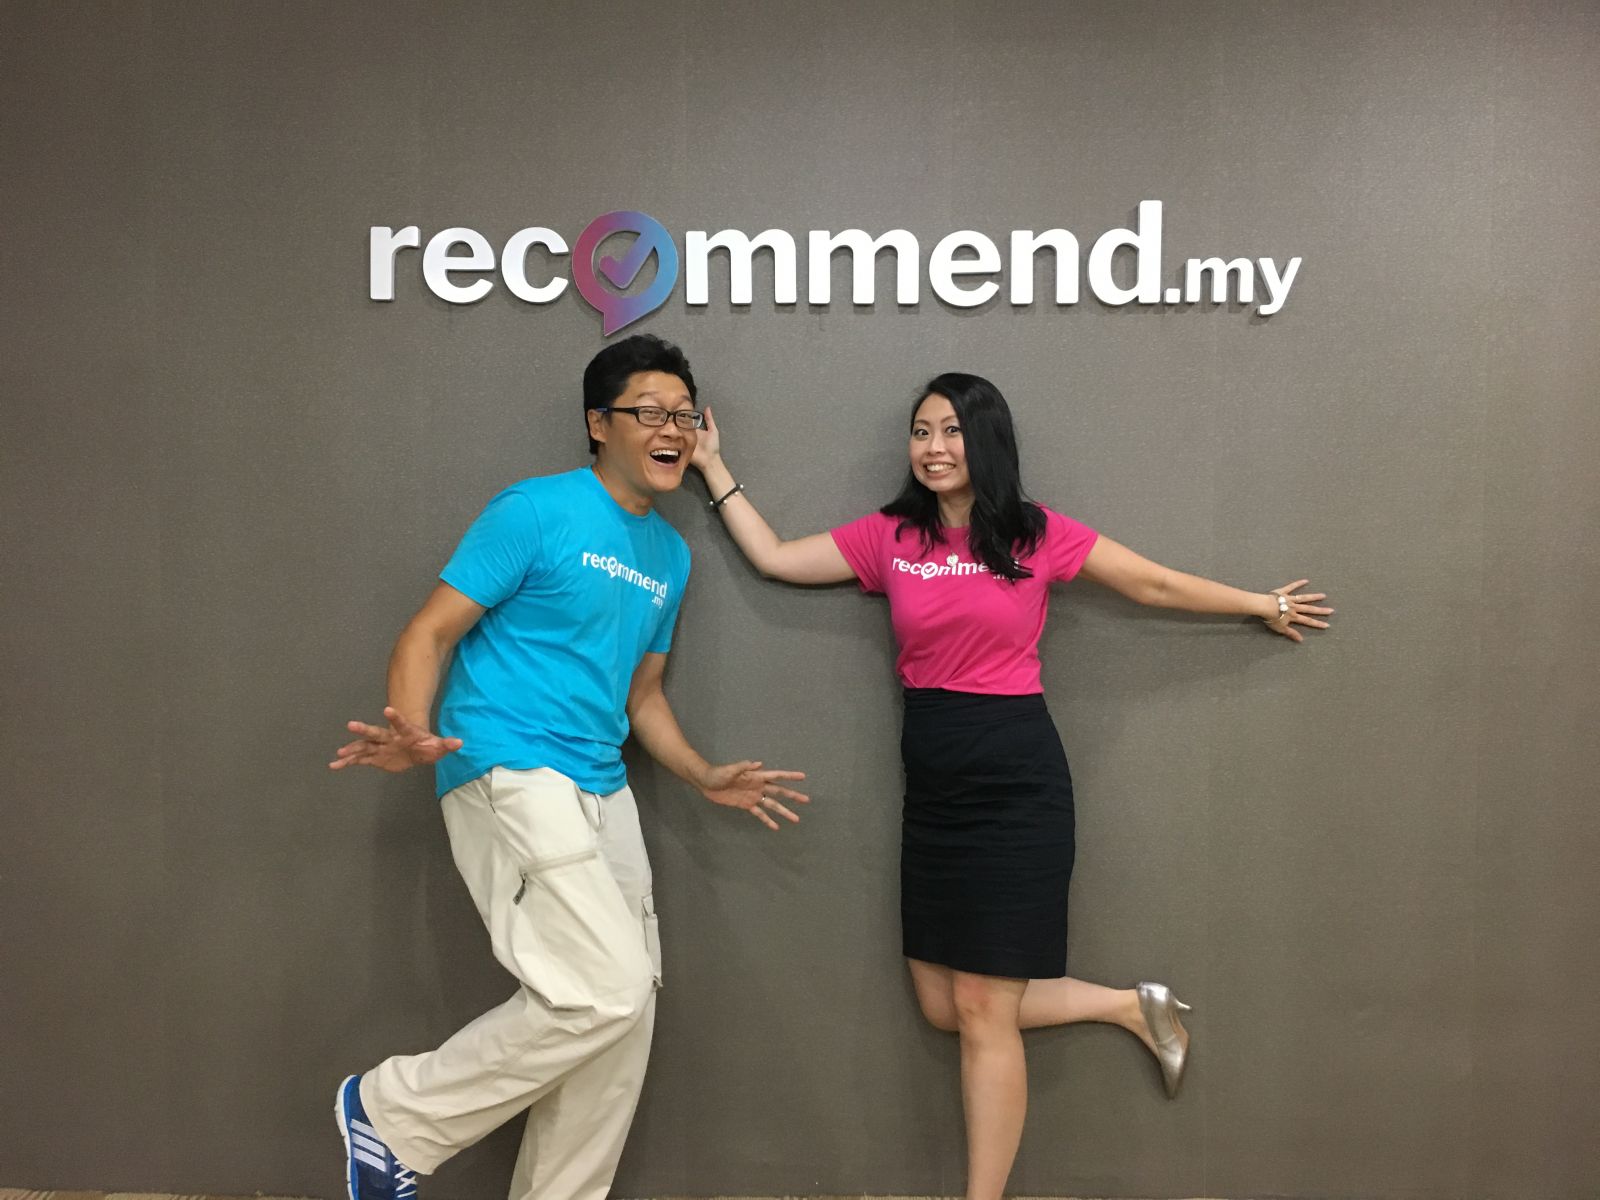 Jes Min Lua (right) with her co-founder Alex Tan decided 9 years ago that they wanted to solve home repair problems. It's been a rollercoaster ride for sure and they are taking it all in while remaining upbeat about the future. 